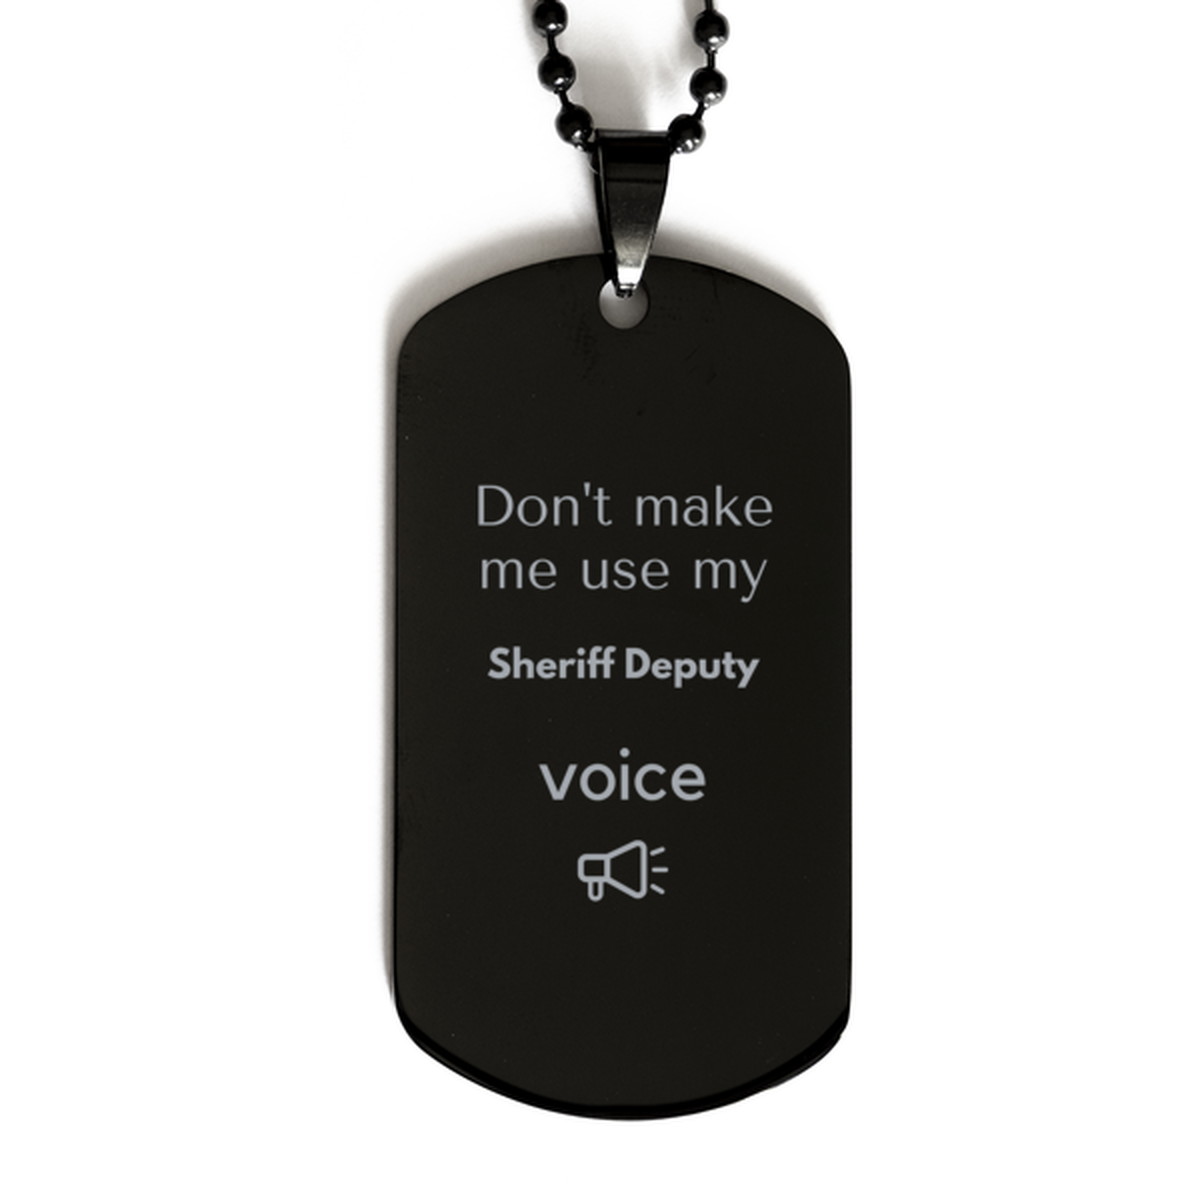 Don't make me use my Sheriff Deputy voice, Sarcasm Sheriff Deputy Gifts, Christmas Sheriff Deputy Black Dog Tag Birthday Unique Gifts For Sheriff Deputy Coworkers, Men, Women, Colleague, Friends